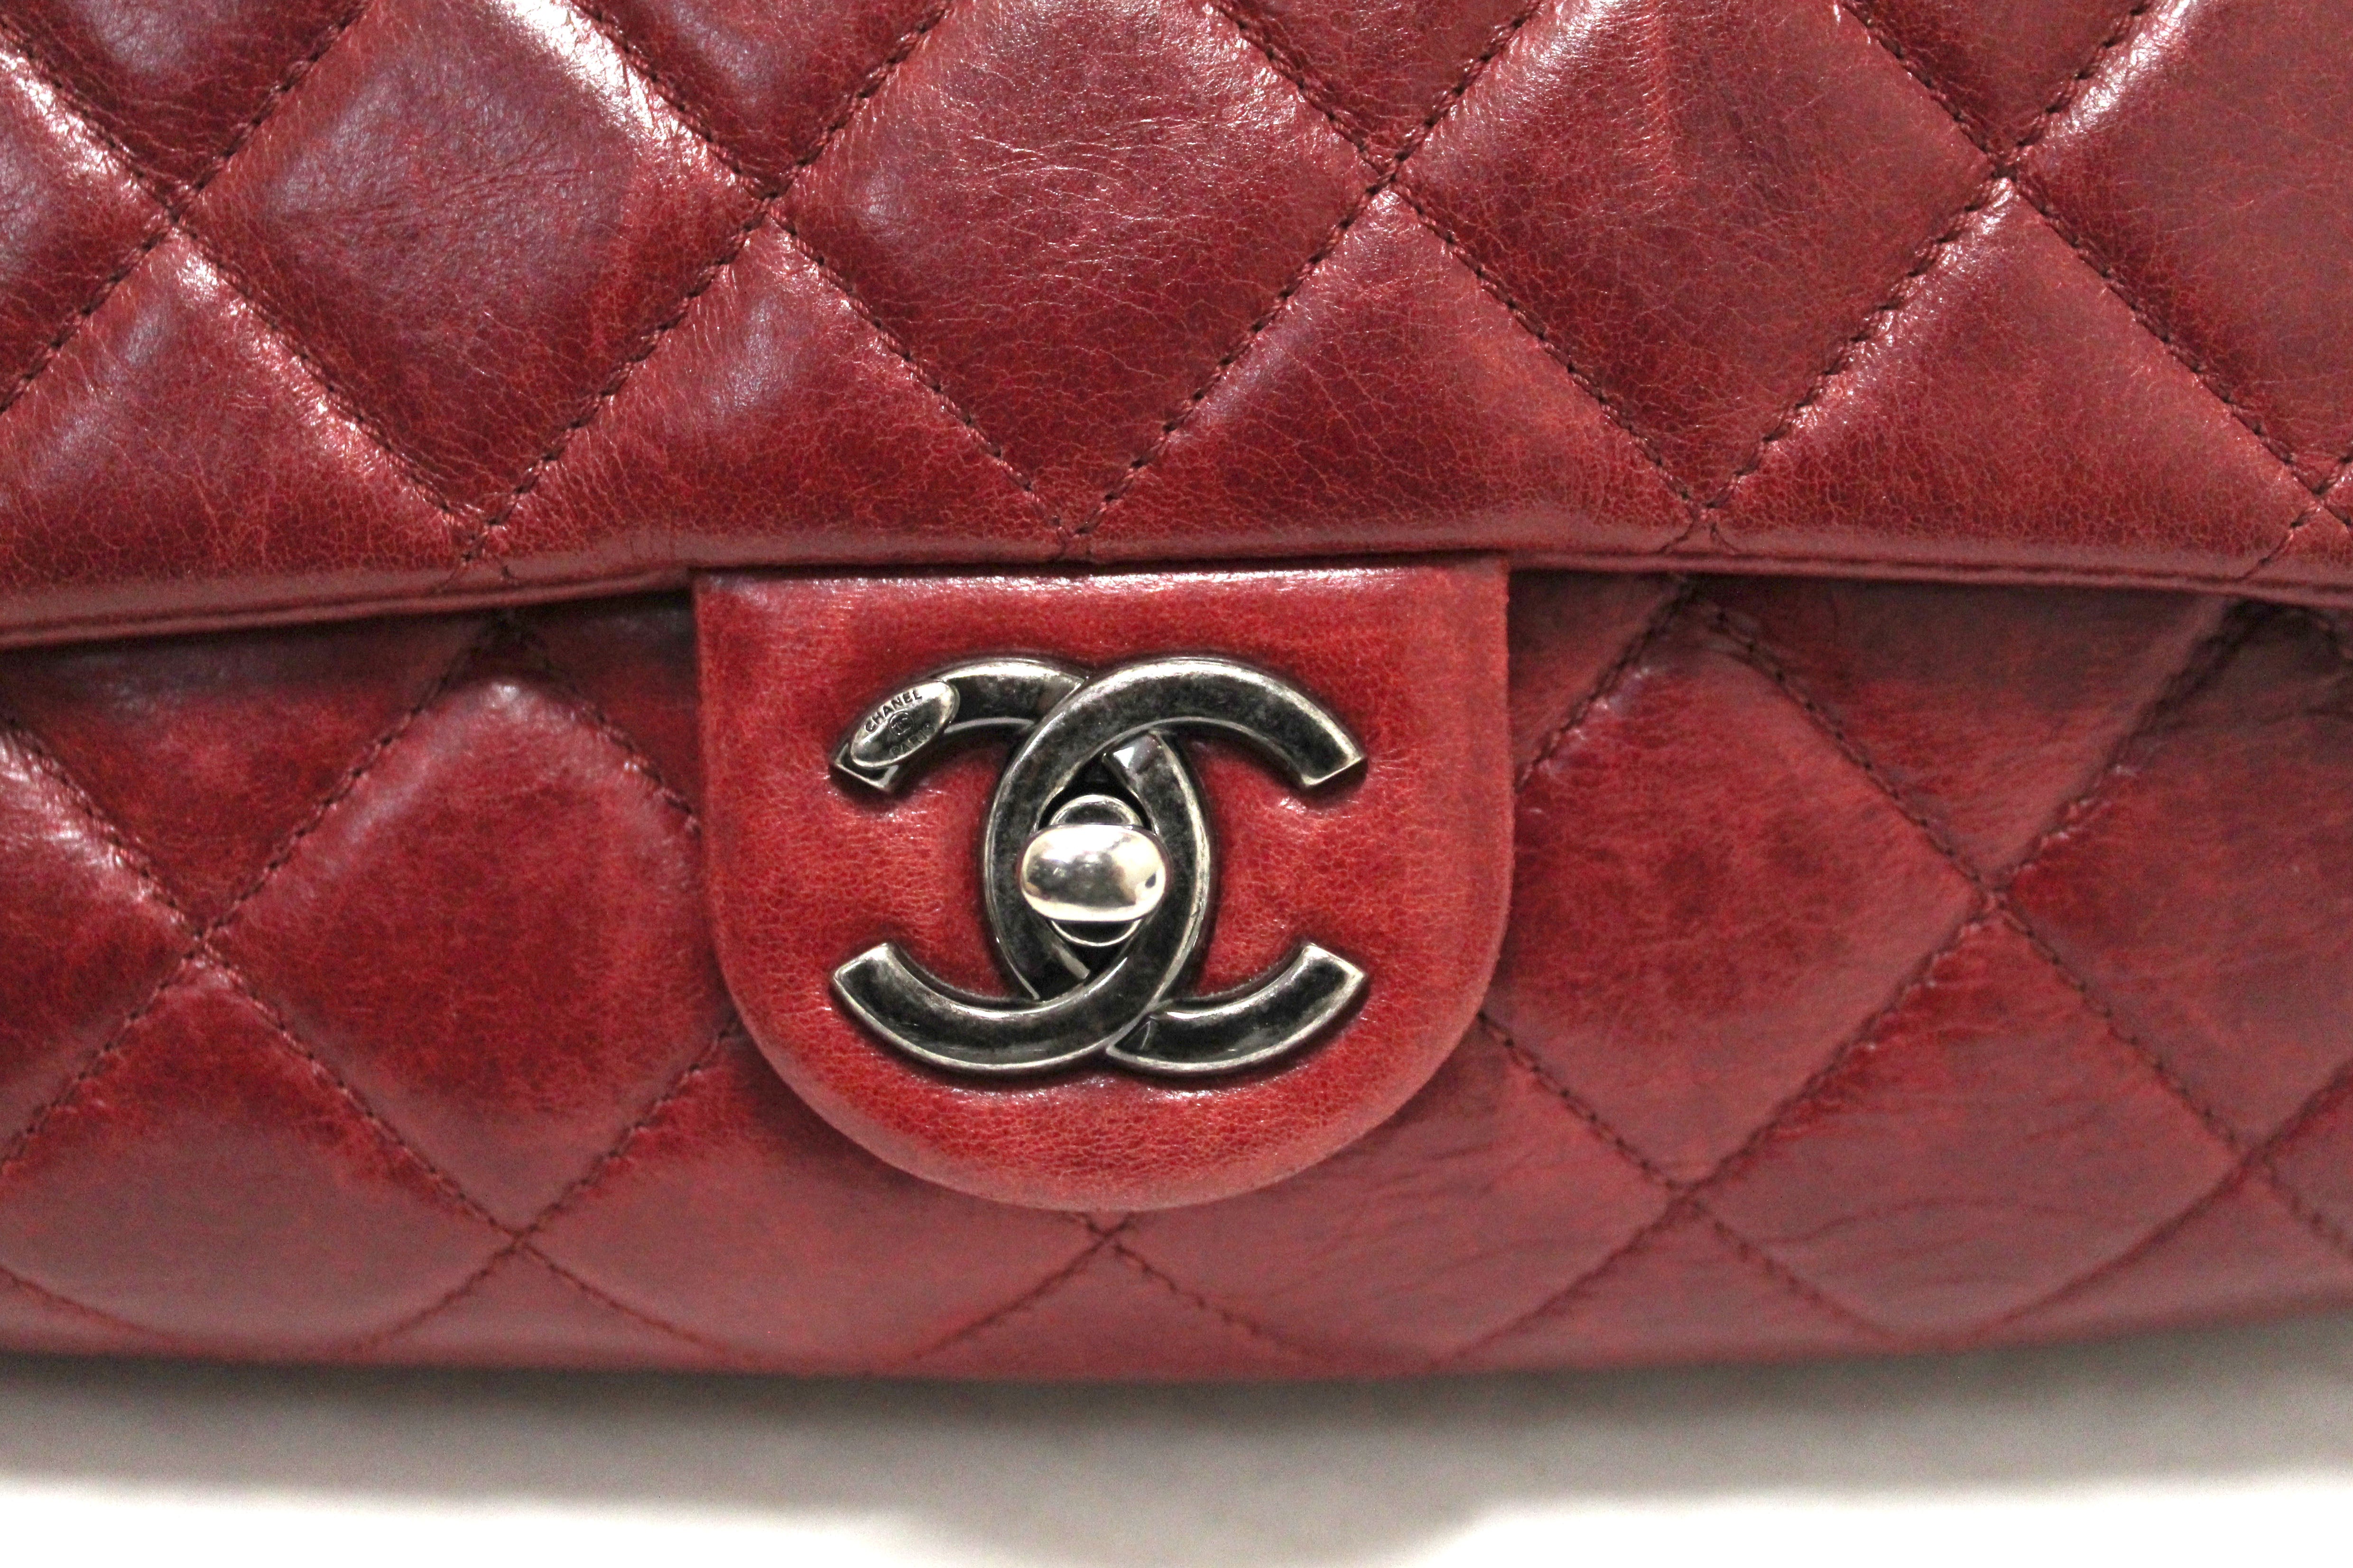 Authentic Chanel Quilted Medium Easy Flap Shoulder Bag